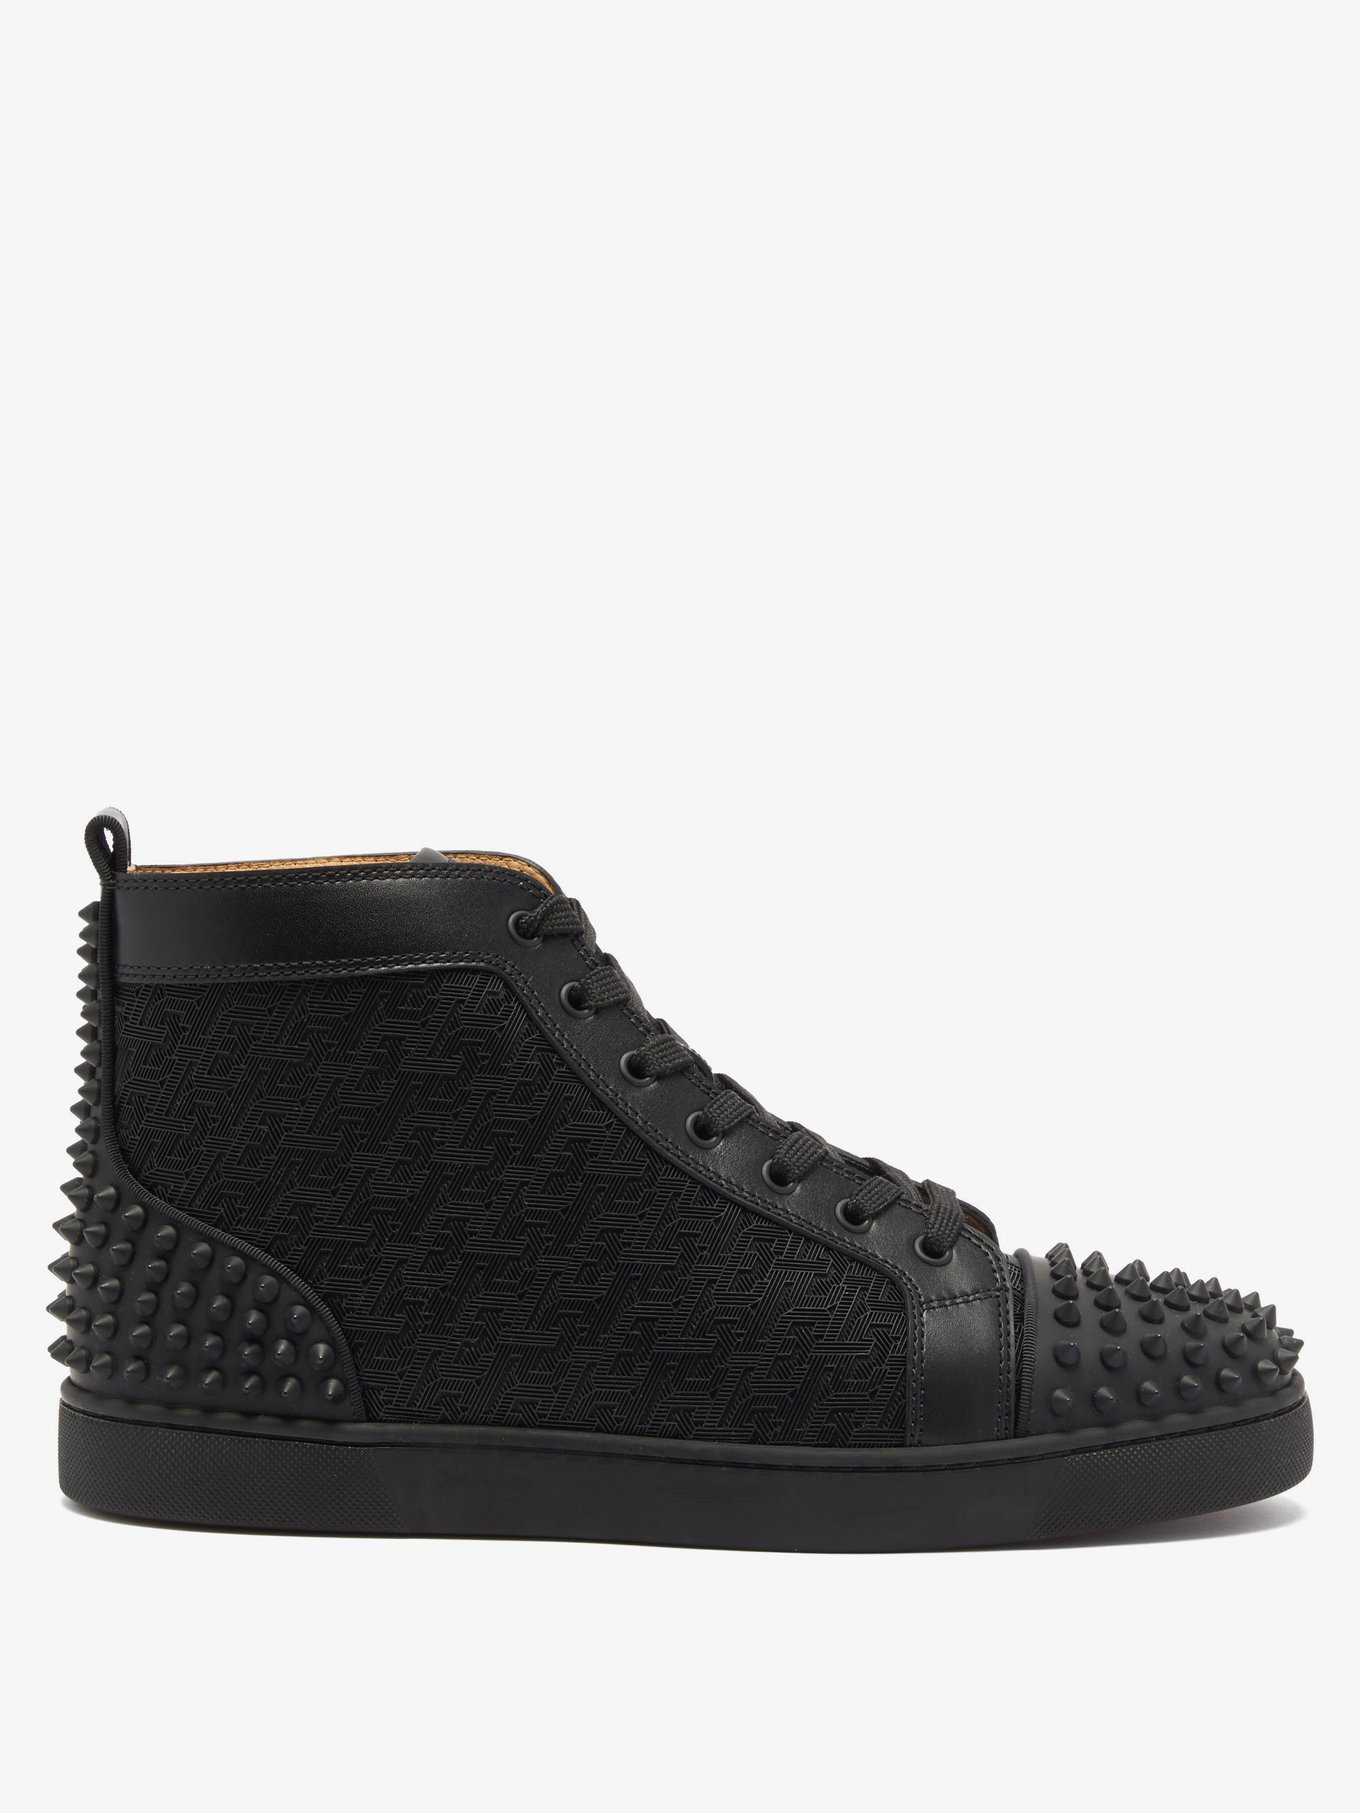 Christian Louboutin Black Leather Louis Spikes High Top Sneakers Size 44.5  Christian Louboutin